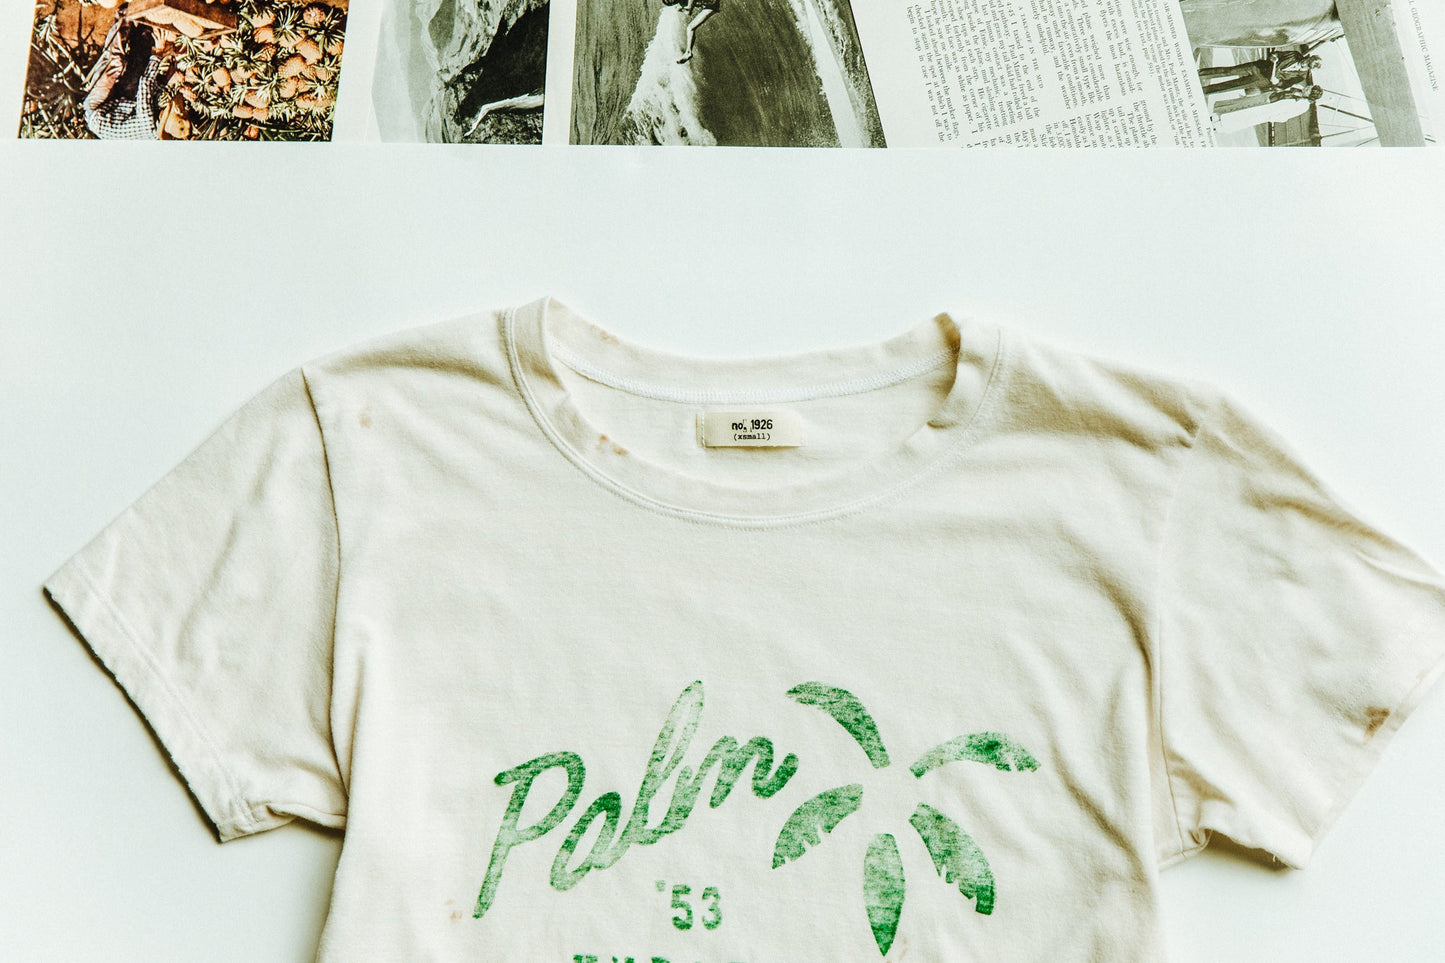 
                  
                    the "palm theatre" tee Tee Number 1926   
                  
                